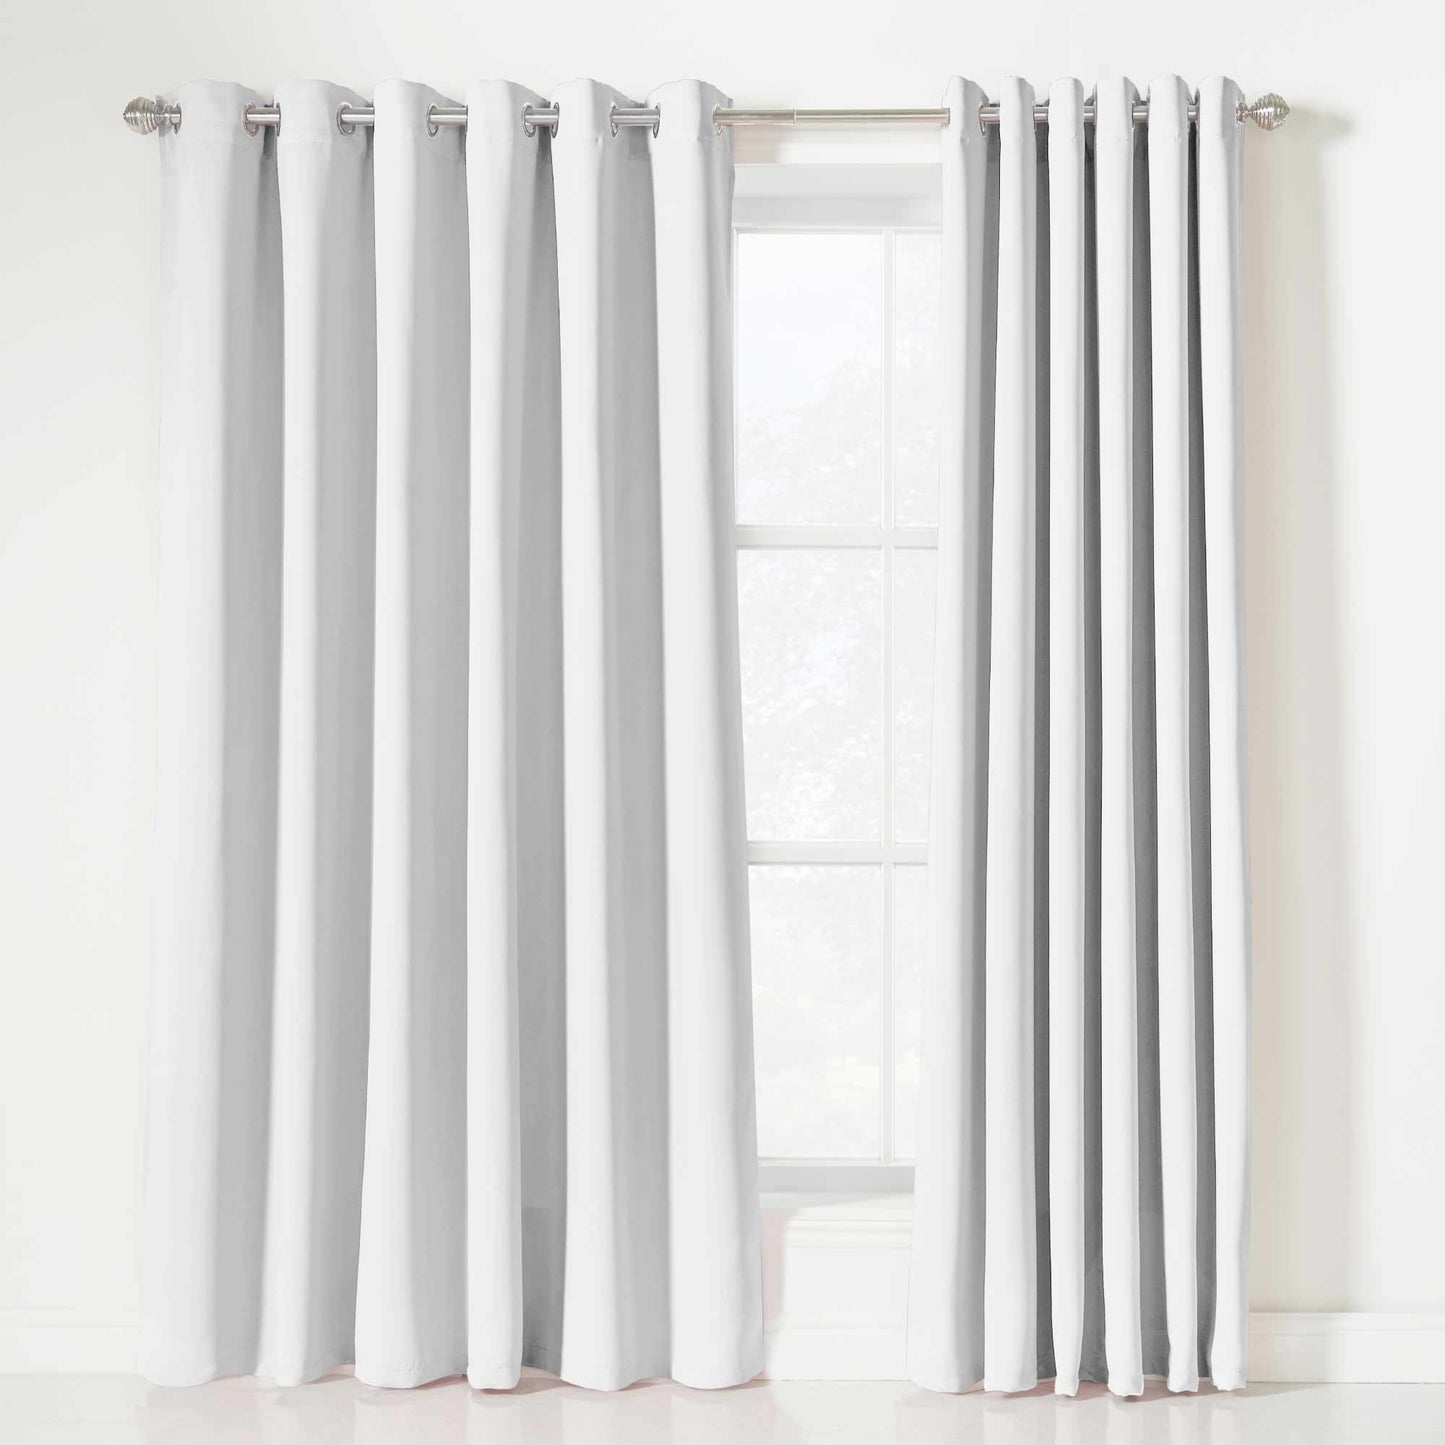 Eclipse Soft Touch Blockout Eyelet Curtains - White